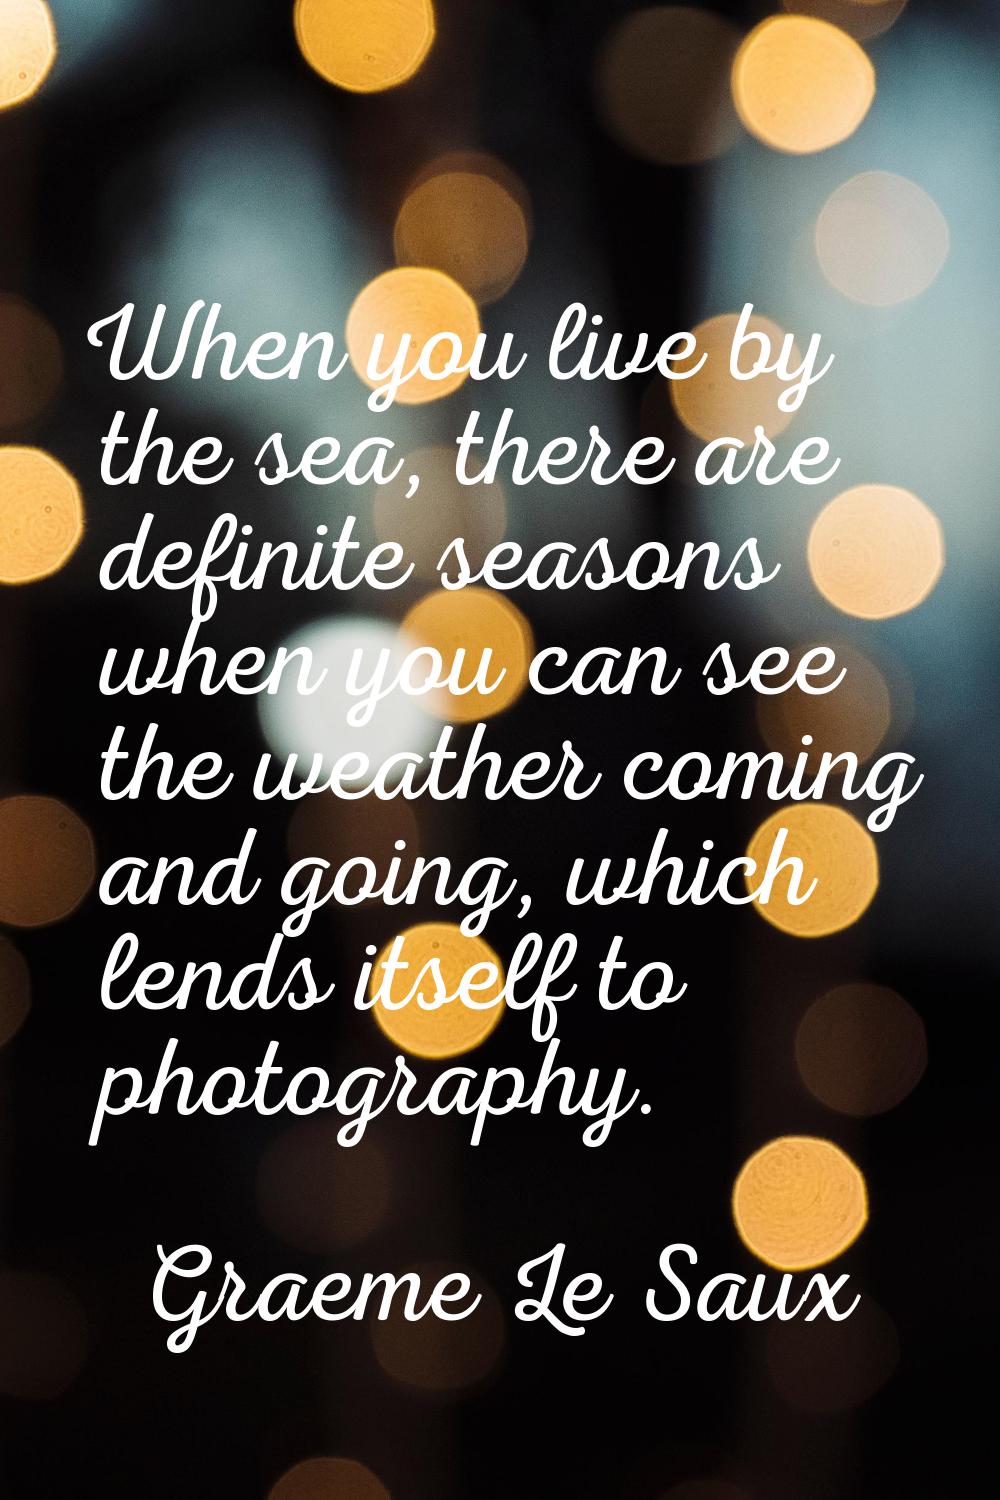 When you live by the sea, there are definite seasons when you can see the weather coming and going,